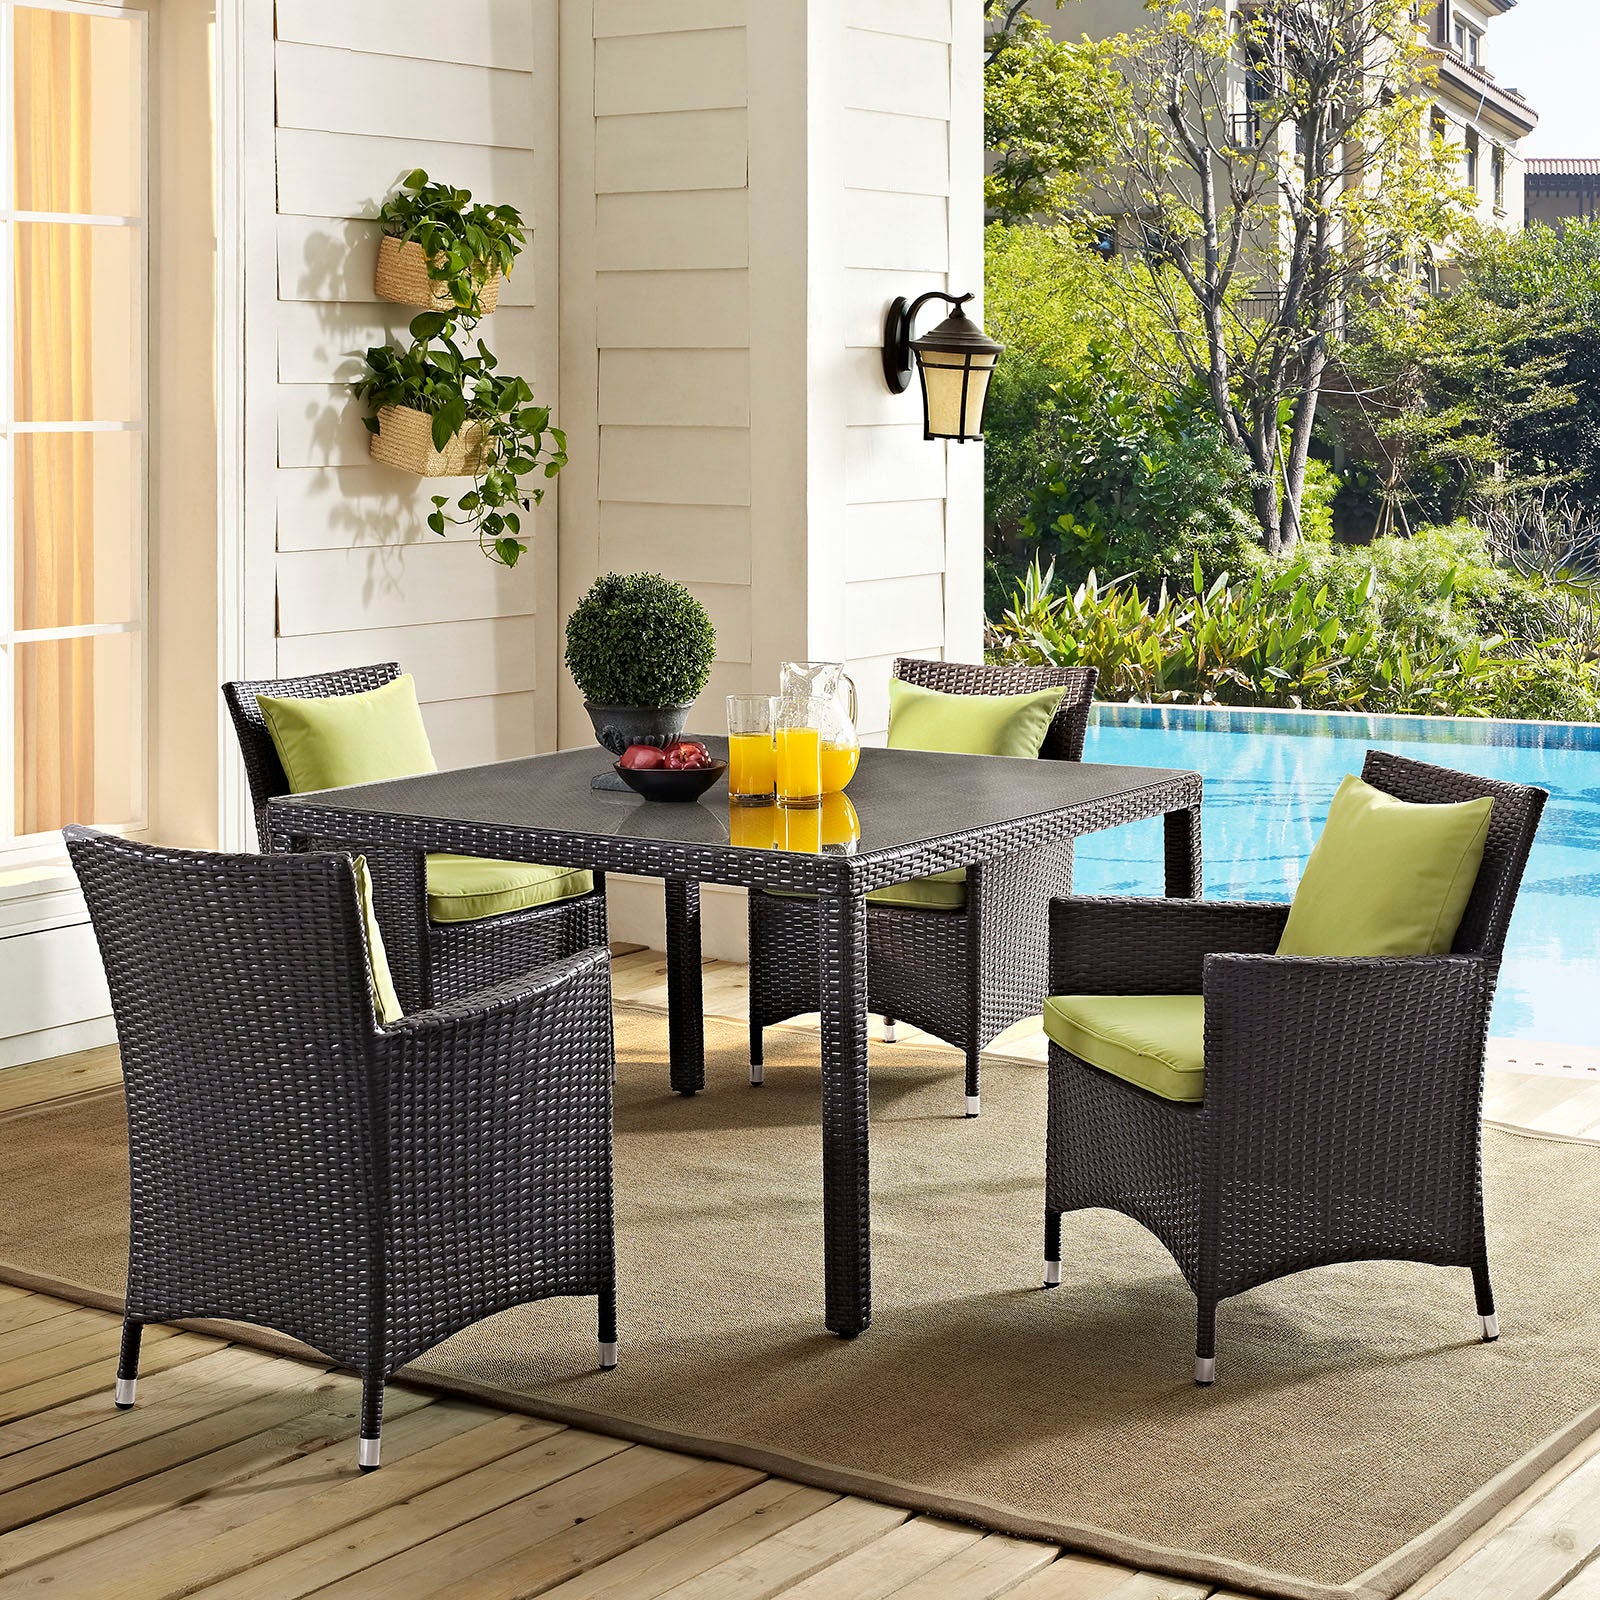 Modway Outdoor Dining Tables - Convene 47" Square Outdoor Dining Table Espresso